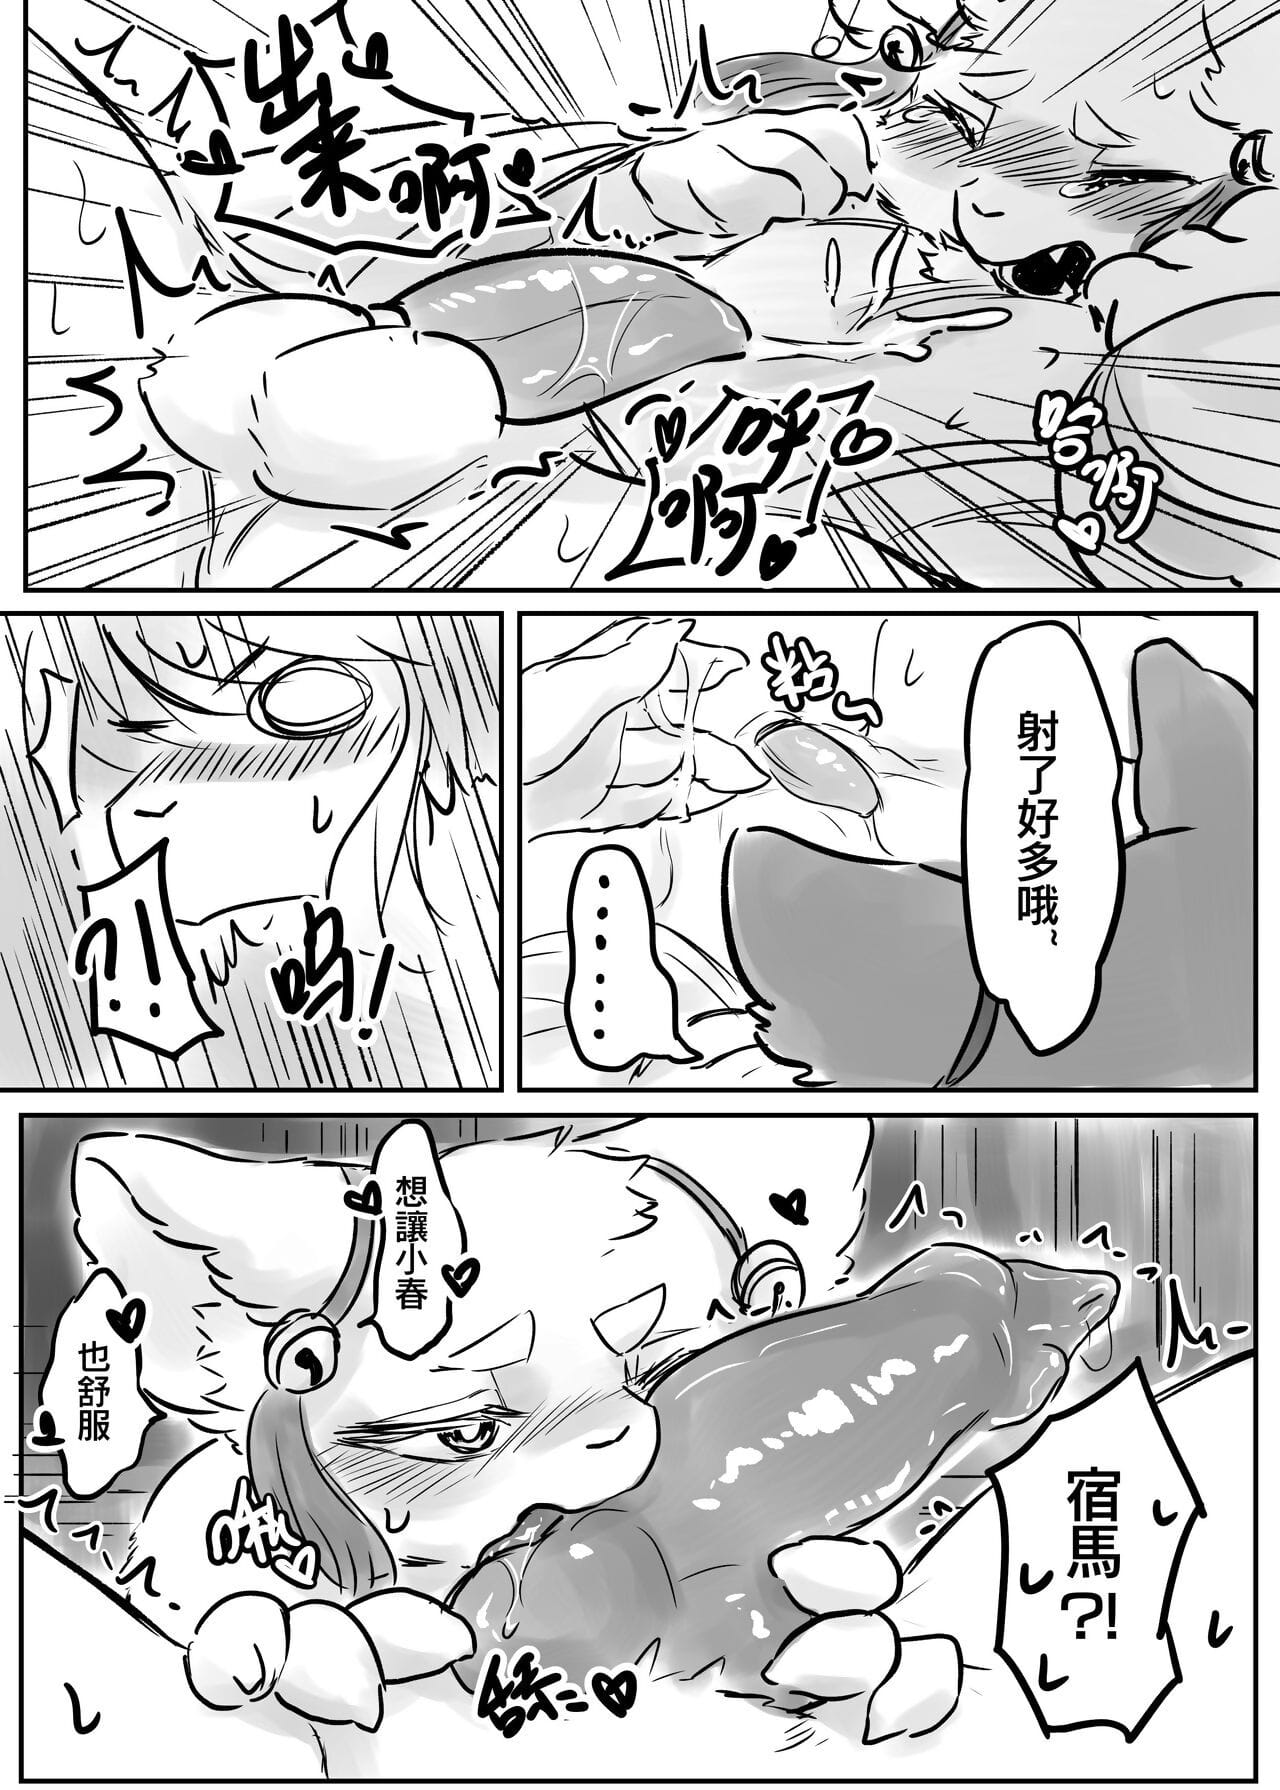 （the 访客 他乡之人 by：鬼流 一部分 3 page 1